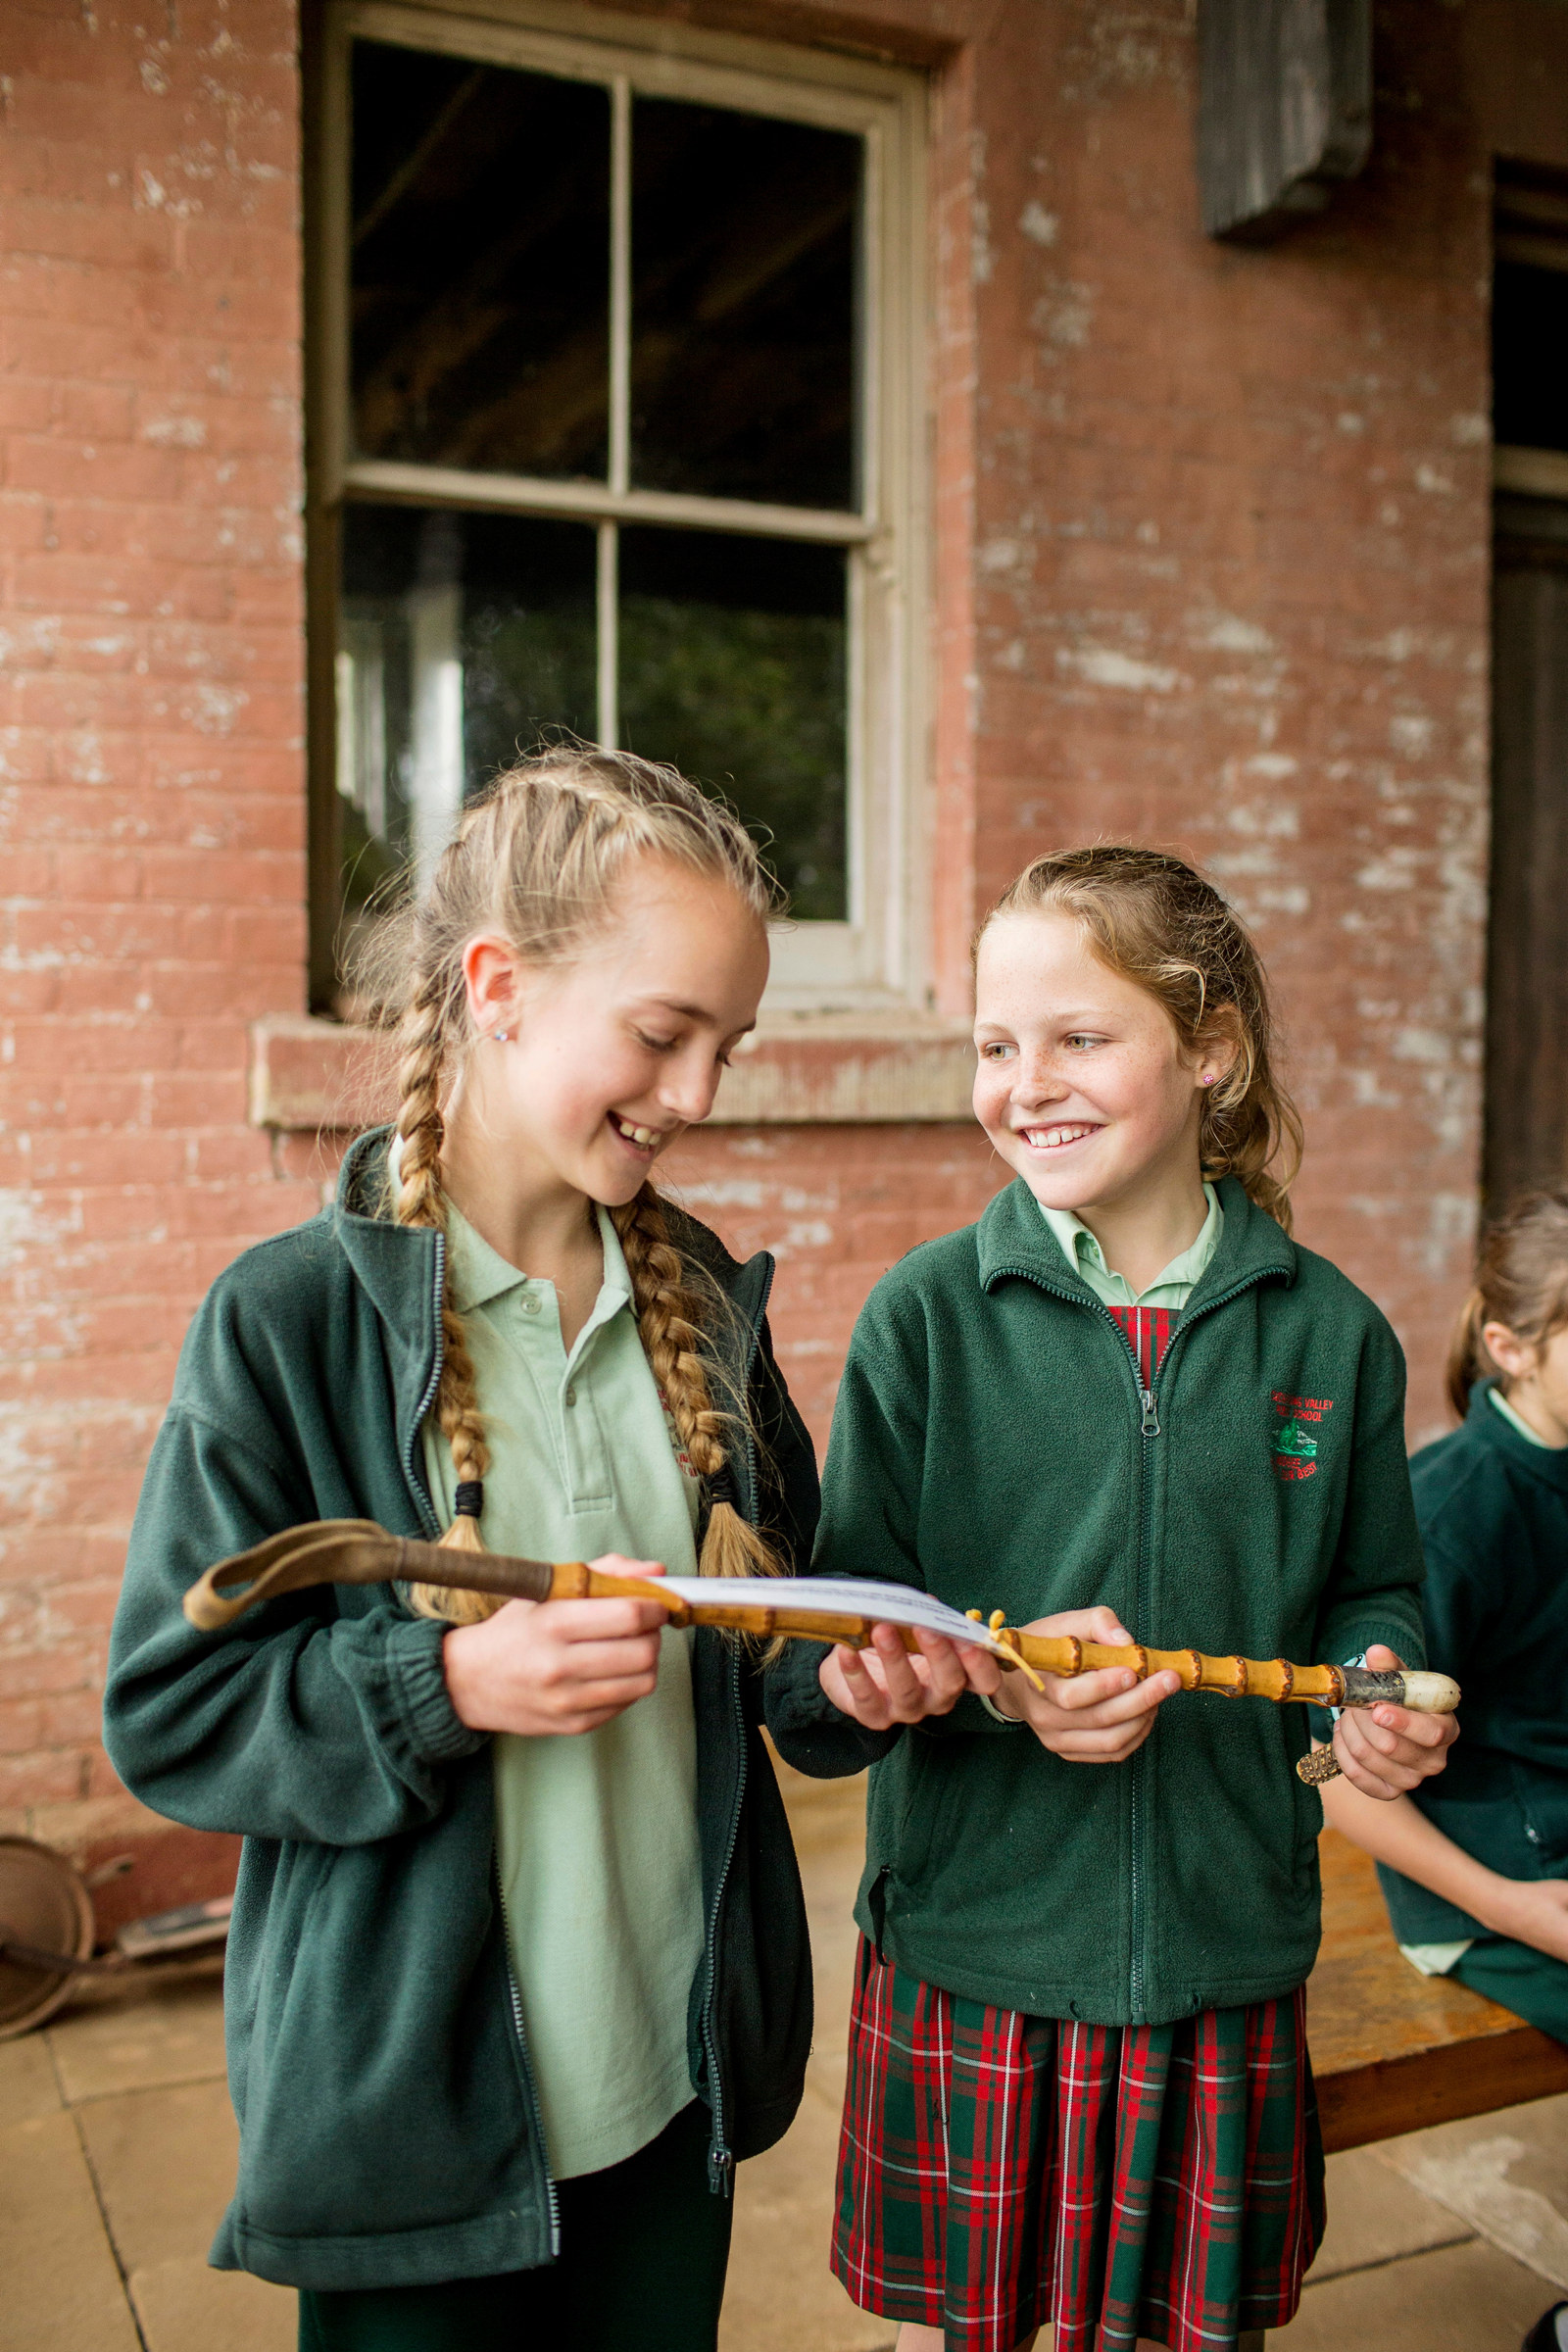 Students examining a riding crop in the Arcade at the rear of Rouse Hill House during the program Expanding the Colony at Rouse Hill Estate